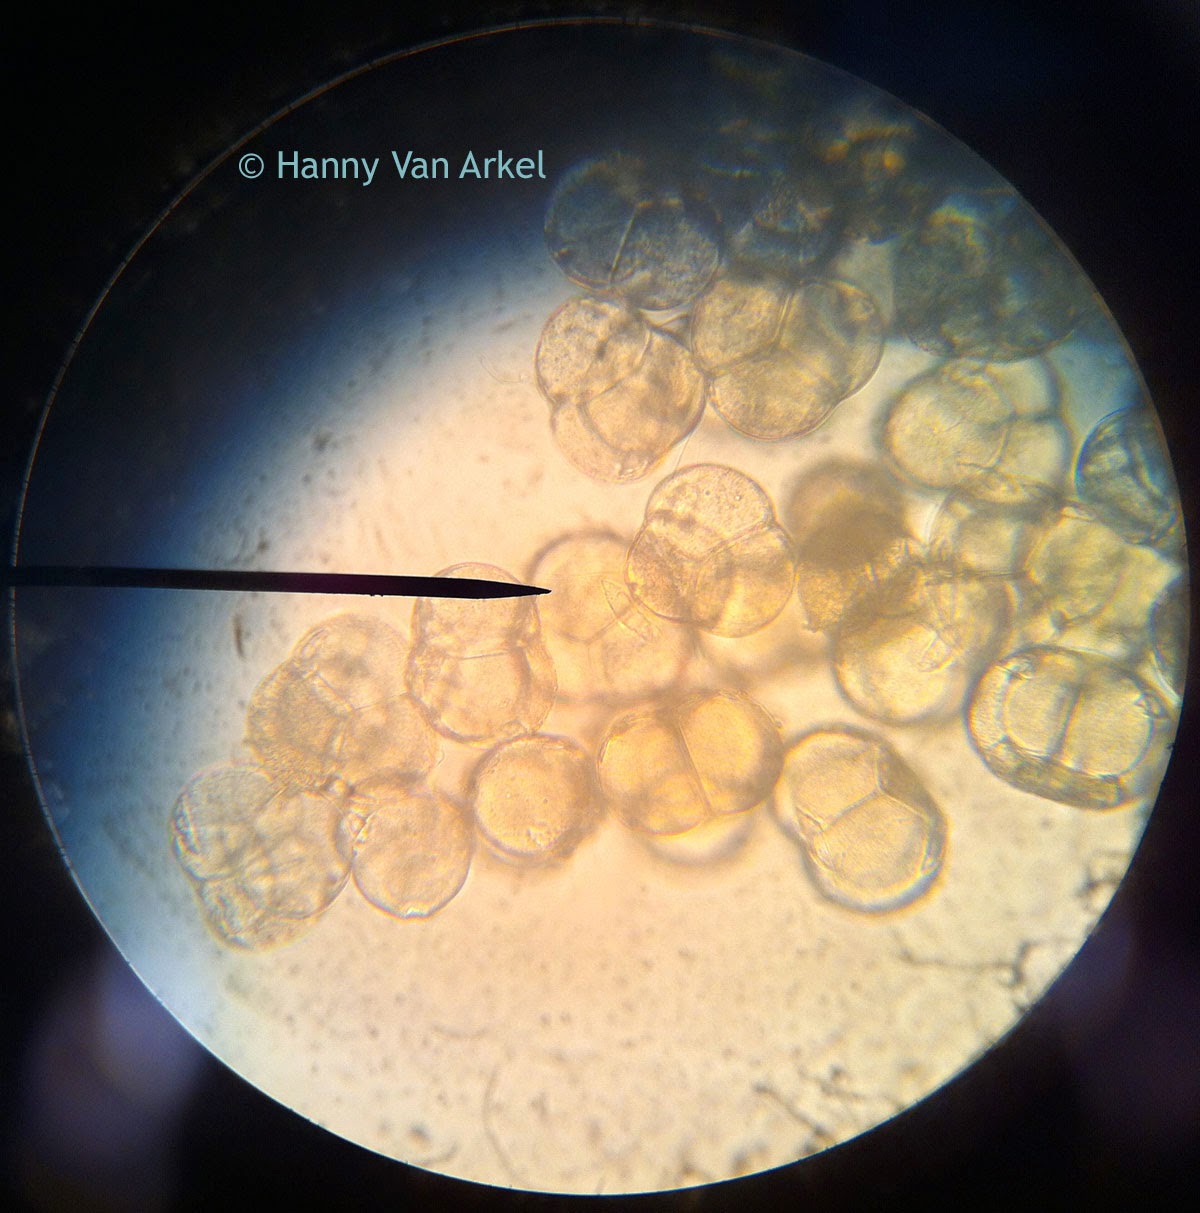 Pollen under the microscope at 400x